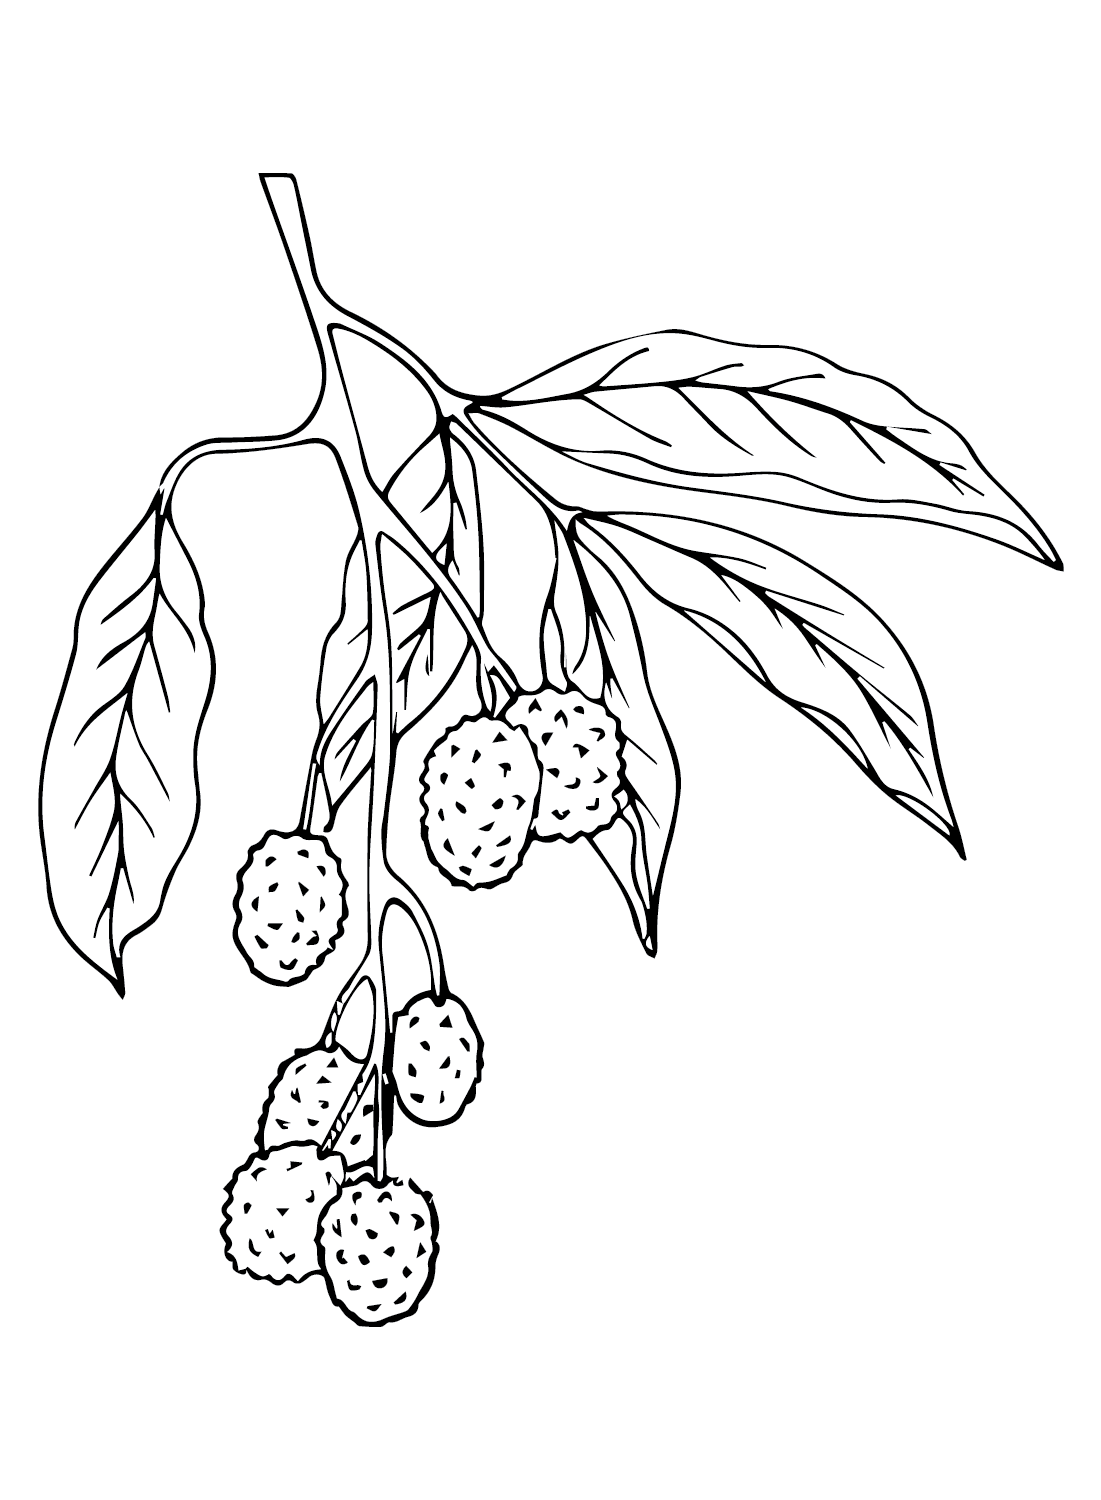 Lychee Branch Coloring Page